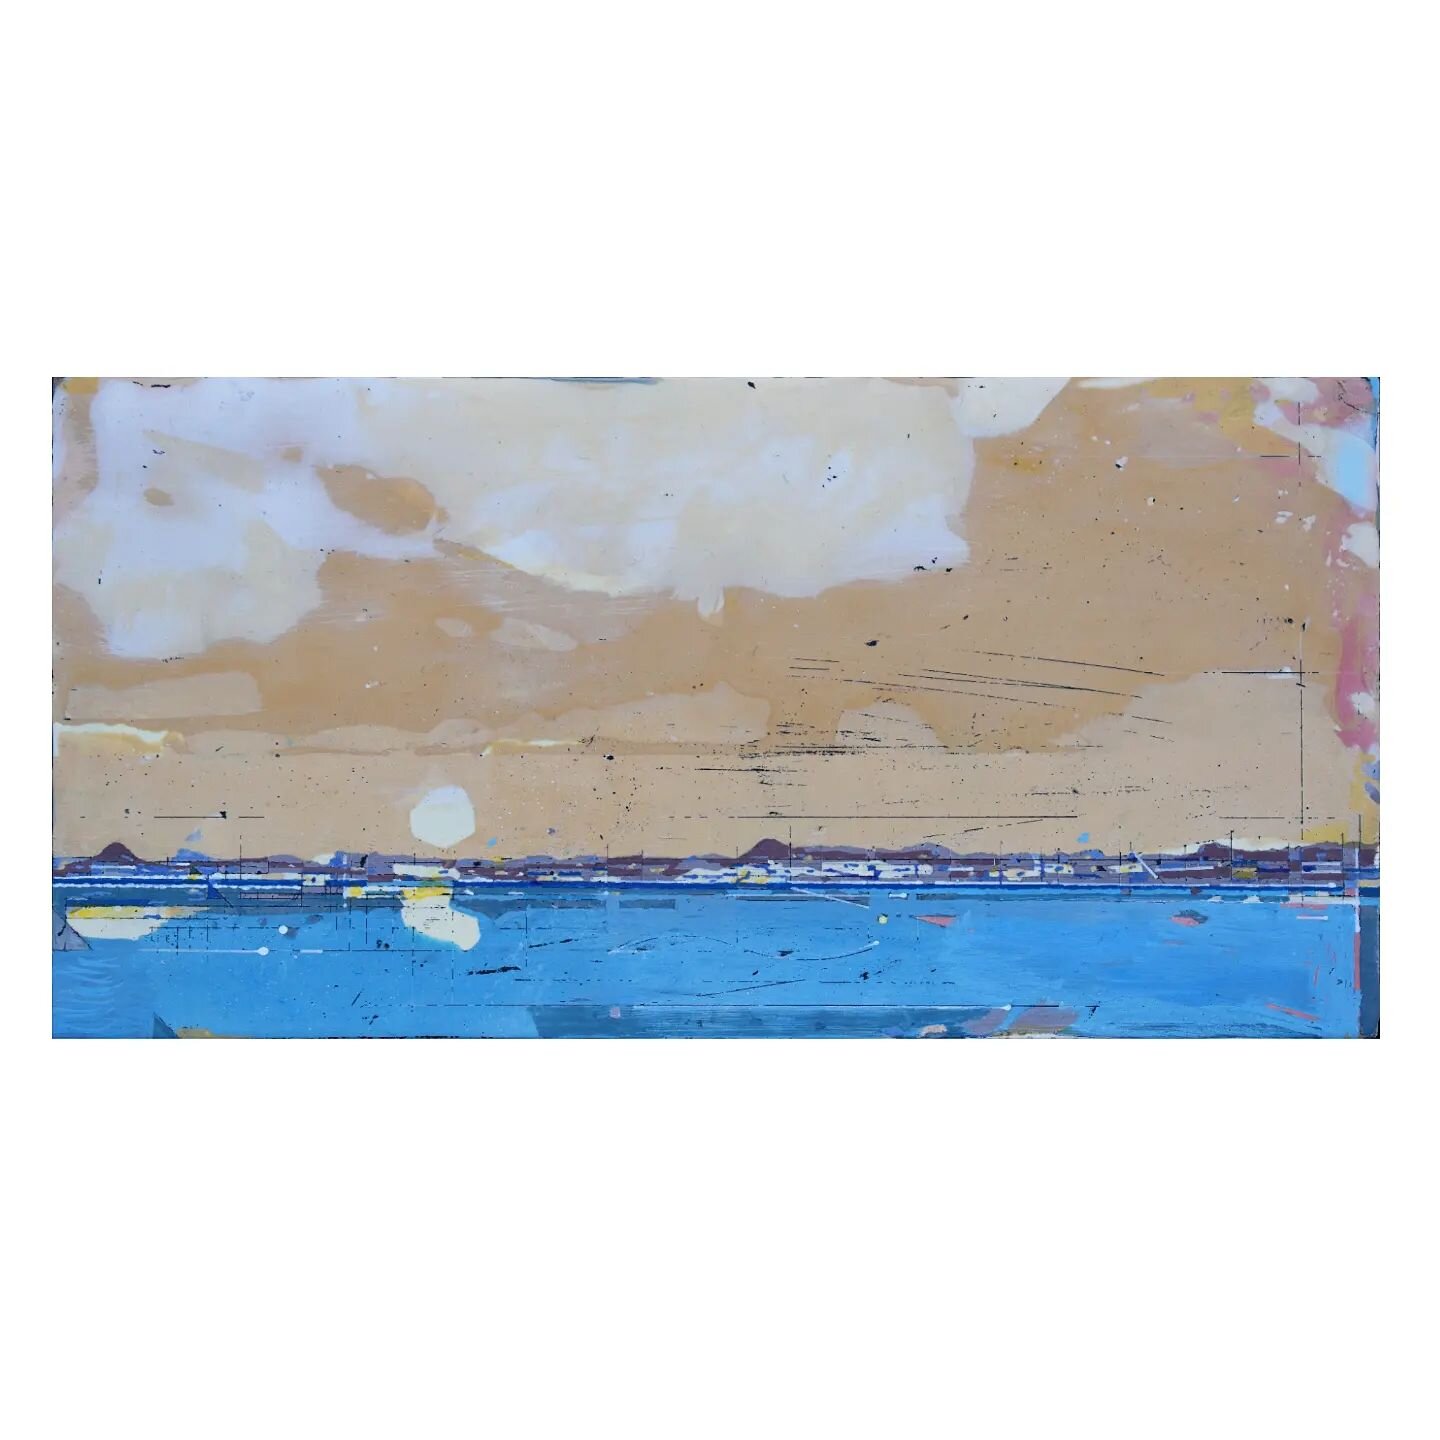 I've added a group of new #artistsupportpledge paintings to my website (link in bio). 

Forth 1 🔴 sold
Pigment on polished, coloured and inlaid plaster with inscribed lines on board.
18 x 9cms

Artist Support Pledge

Artists post images and share th